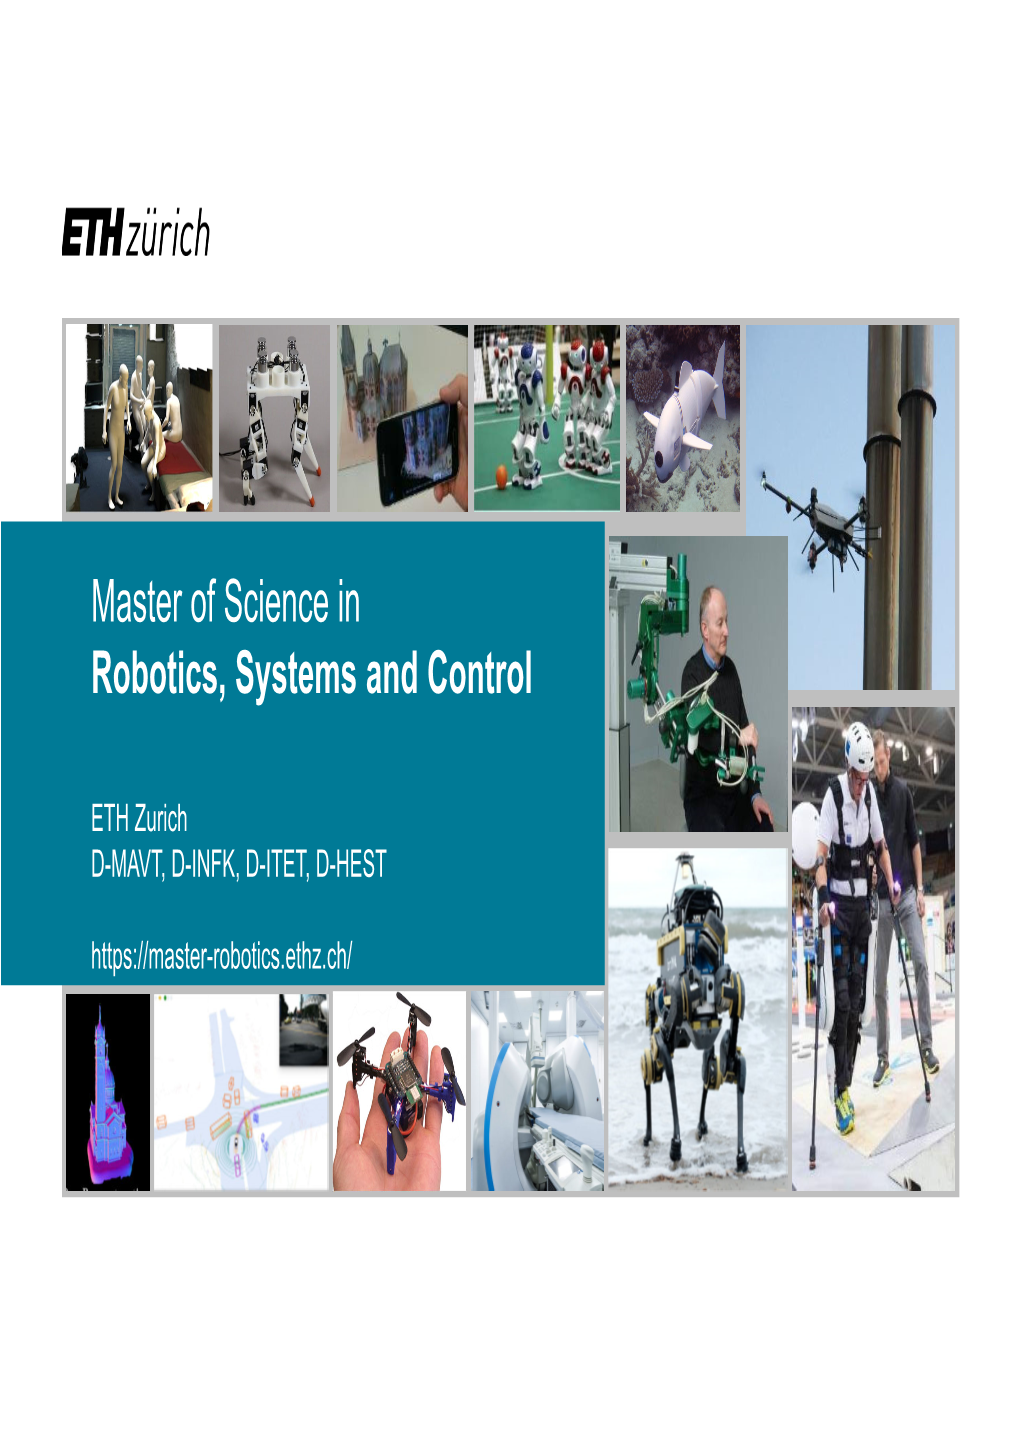 Msc in Robotics, Systems and Control